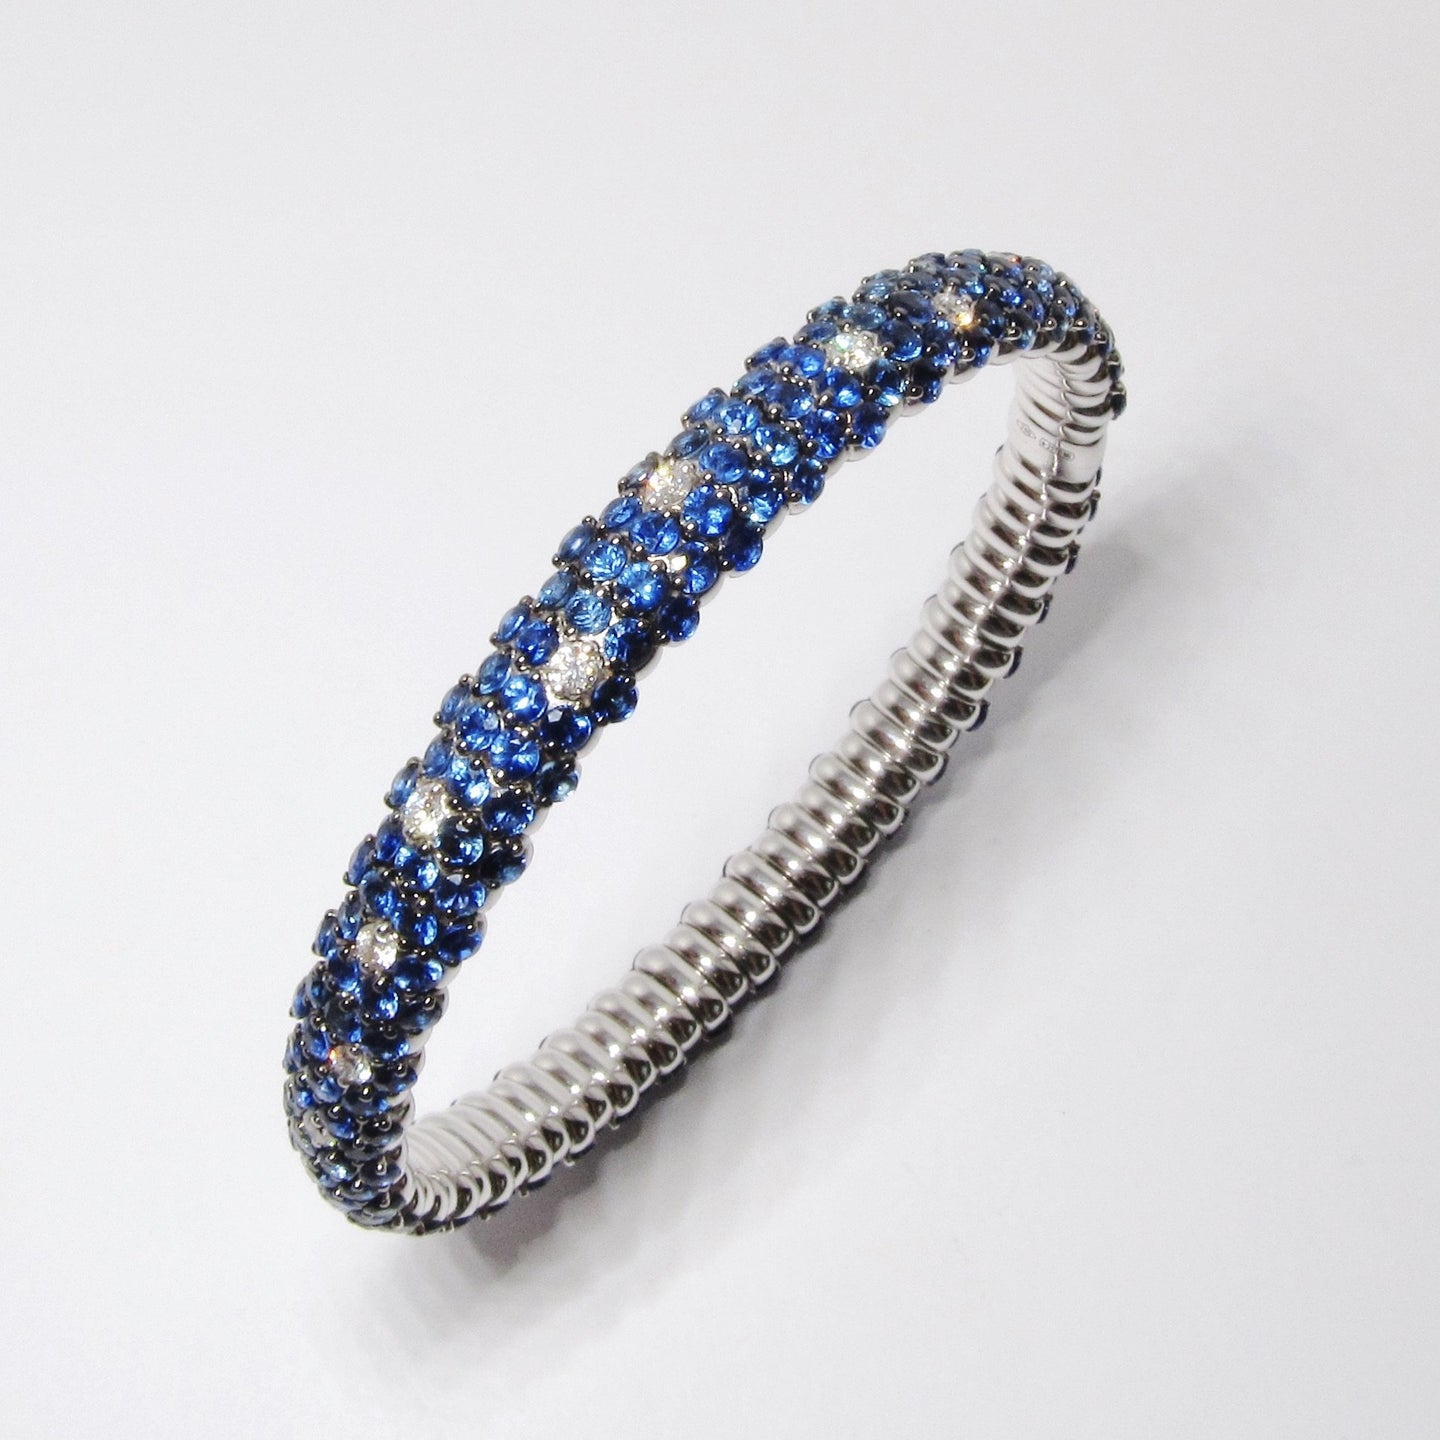 Sapphire & Diamond Stretchy Bangle Bracelet (Available in Pink & Blue)